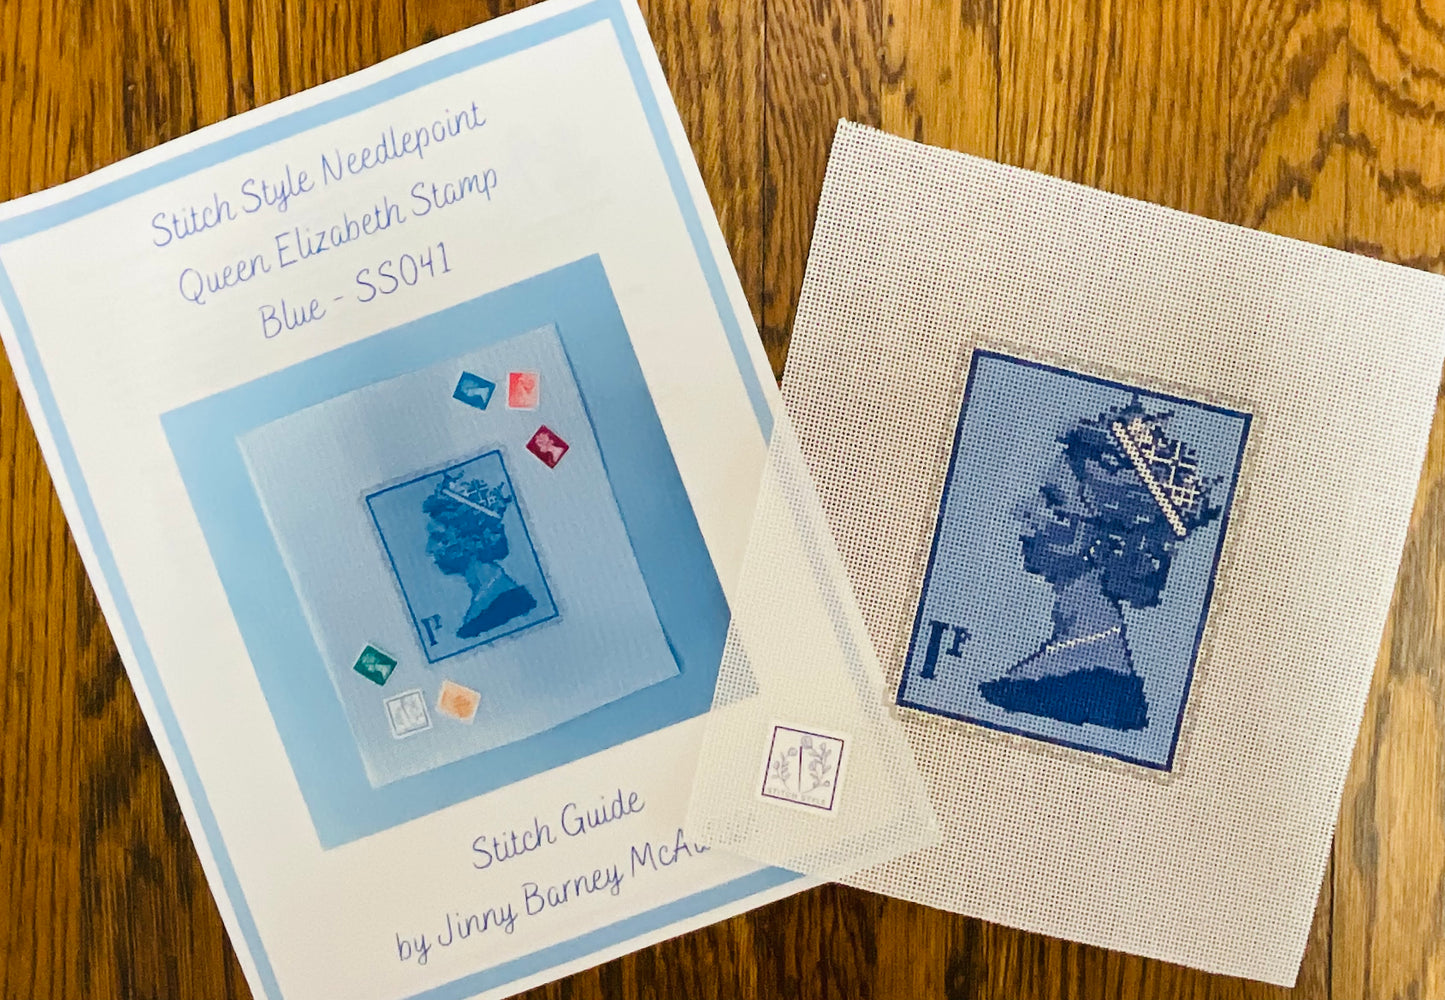 Queen Elizabeth Stamp with Stitch Guide by Jinny Barney McAuliffe